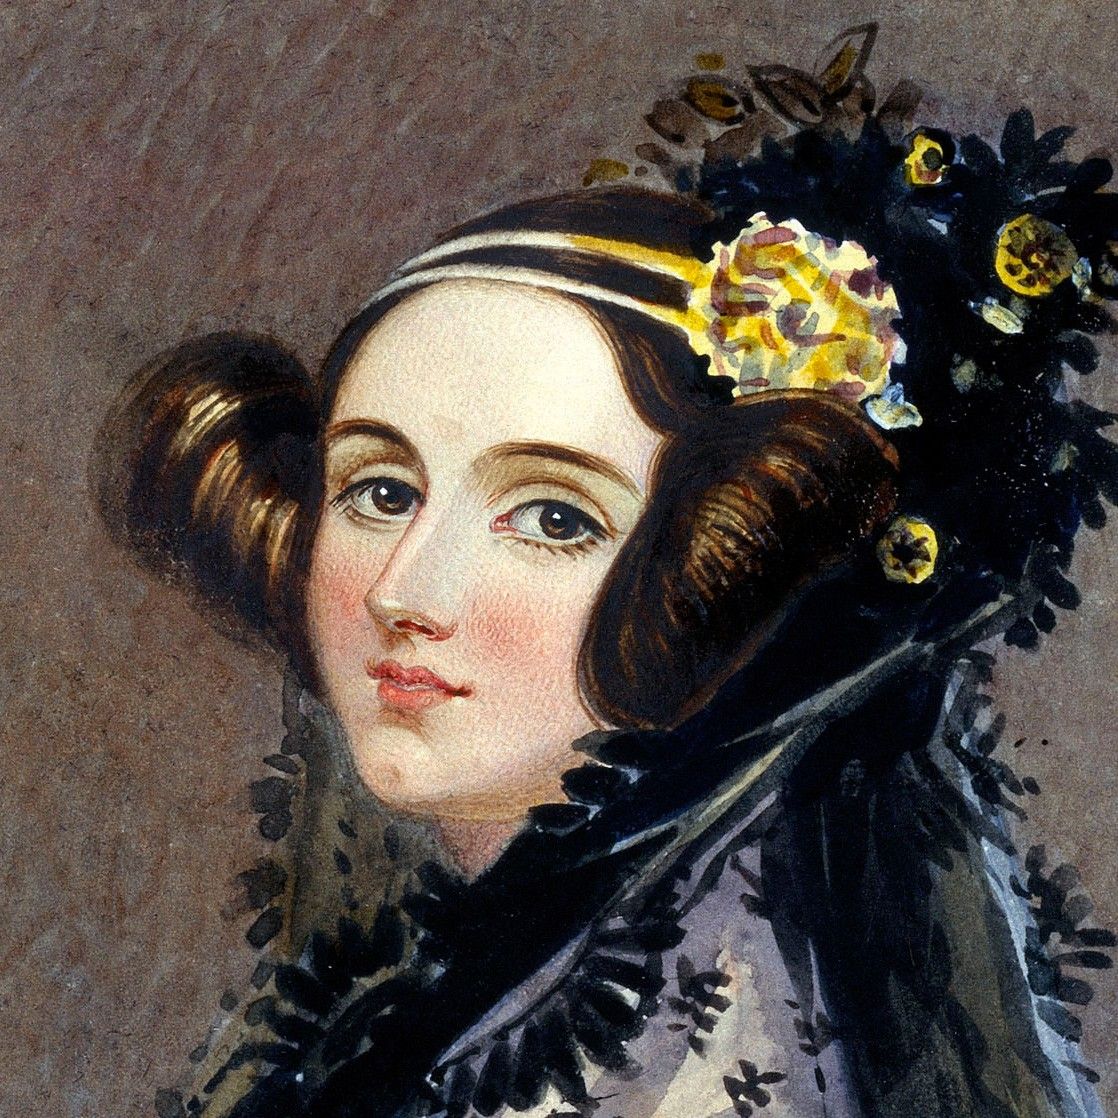 Who is Ada Lovelace? The story behind one of the finest minds in computing https://t.co/Vrb39Wz6In #ALD17 #AdaLovelaceDay #InspiredByAda https://t.co/R7ZnKb60ON